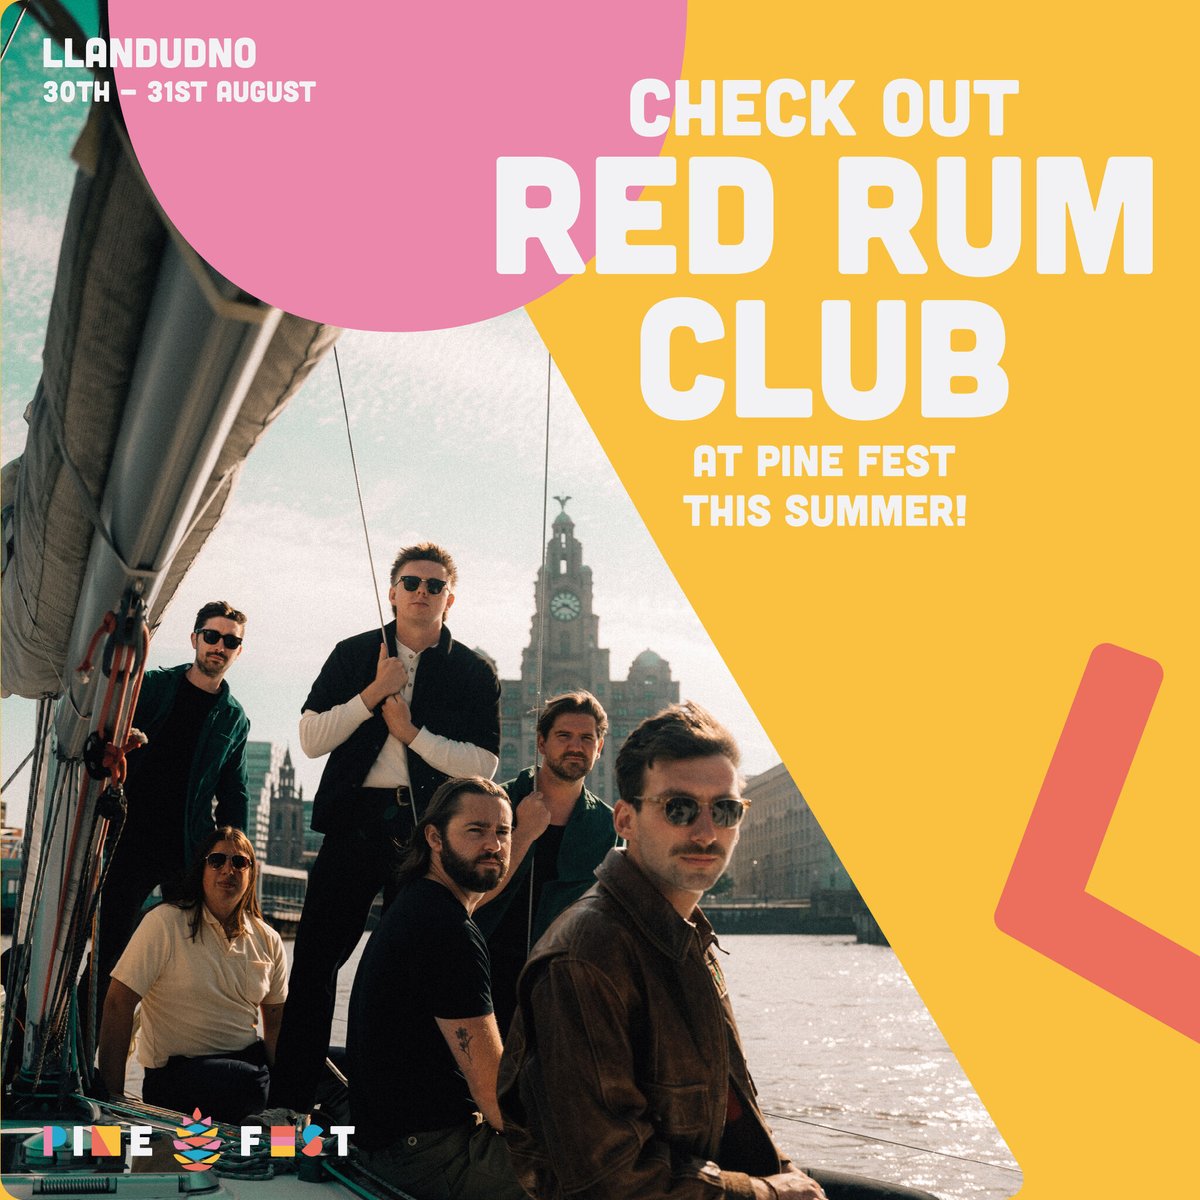 Red Rum Club x Pine Fest!!! Hailing from Liverpool, @redrumclub are a sex-tet channelling ‘Tarantino-esque’ wild western vibes with a solitary trumpet. Their latest album Weston Approaches secured a Number 7 in the album charts in its debut week bit.ly/43wXK8U